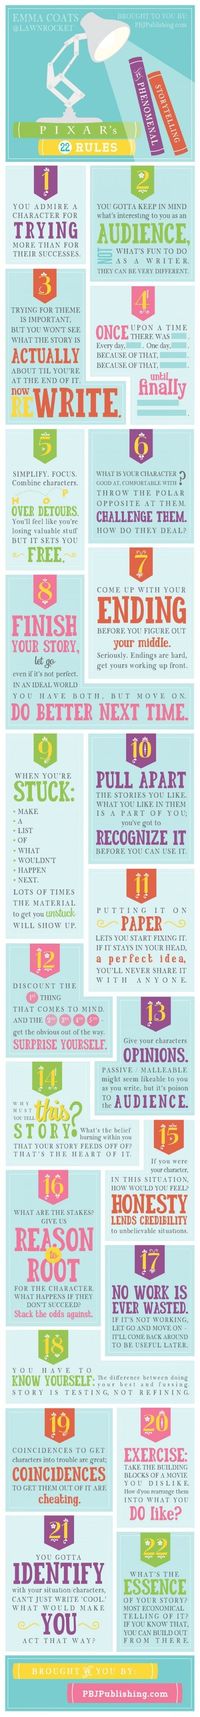 22 rules to storytelling